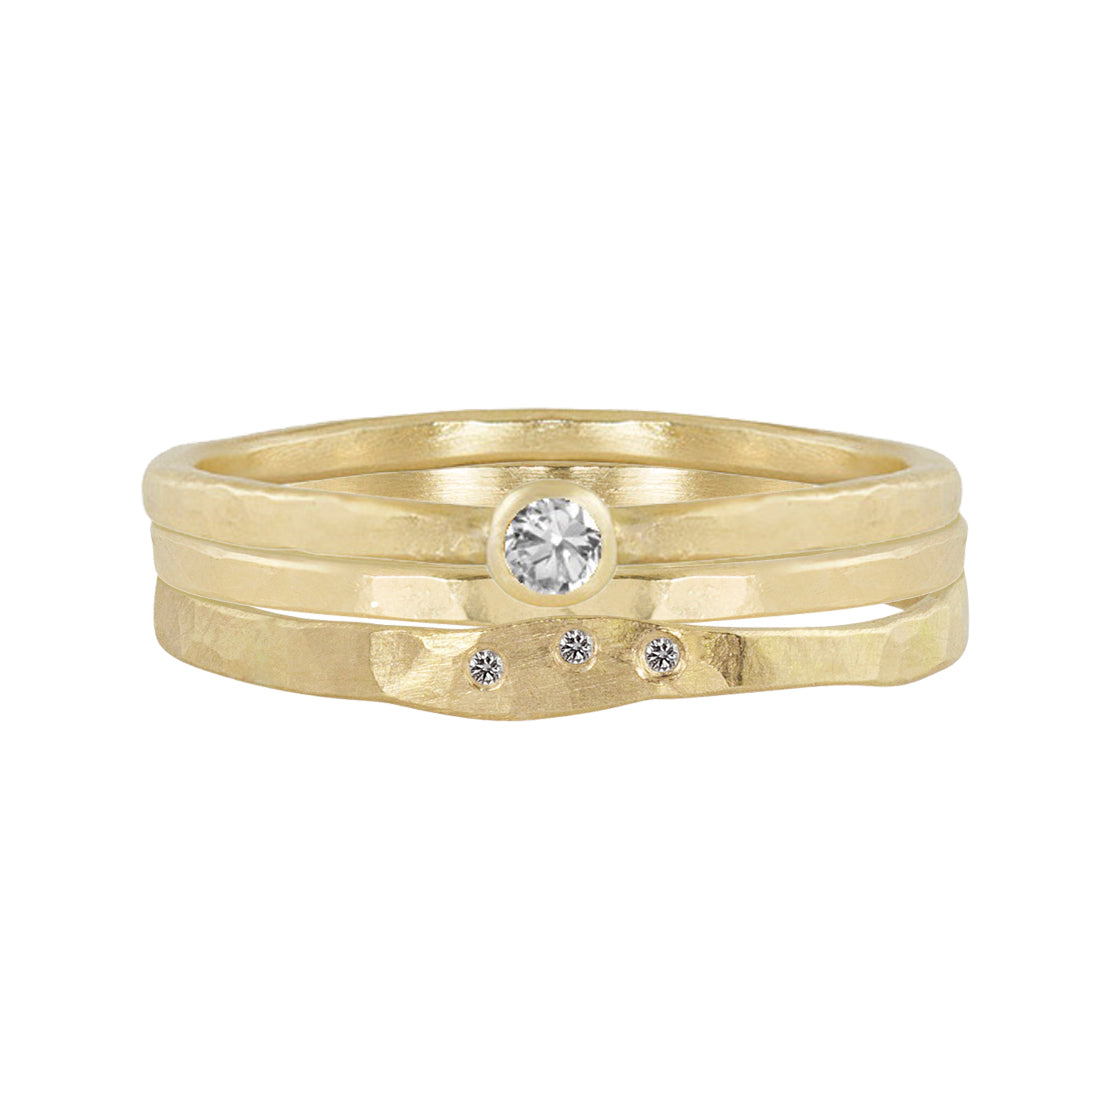 14k yellow gold RELA stacker ring with diamond